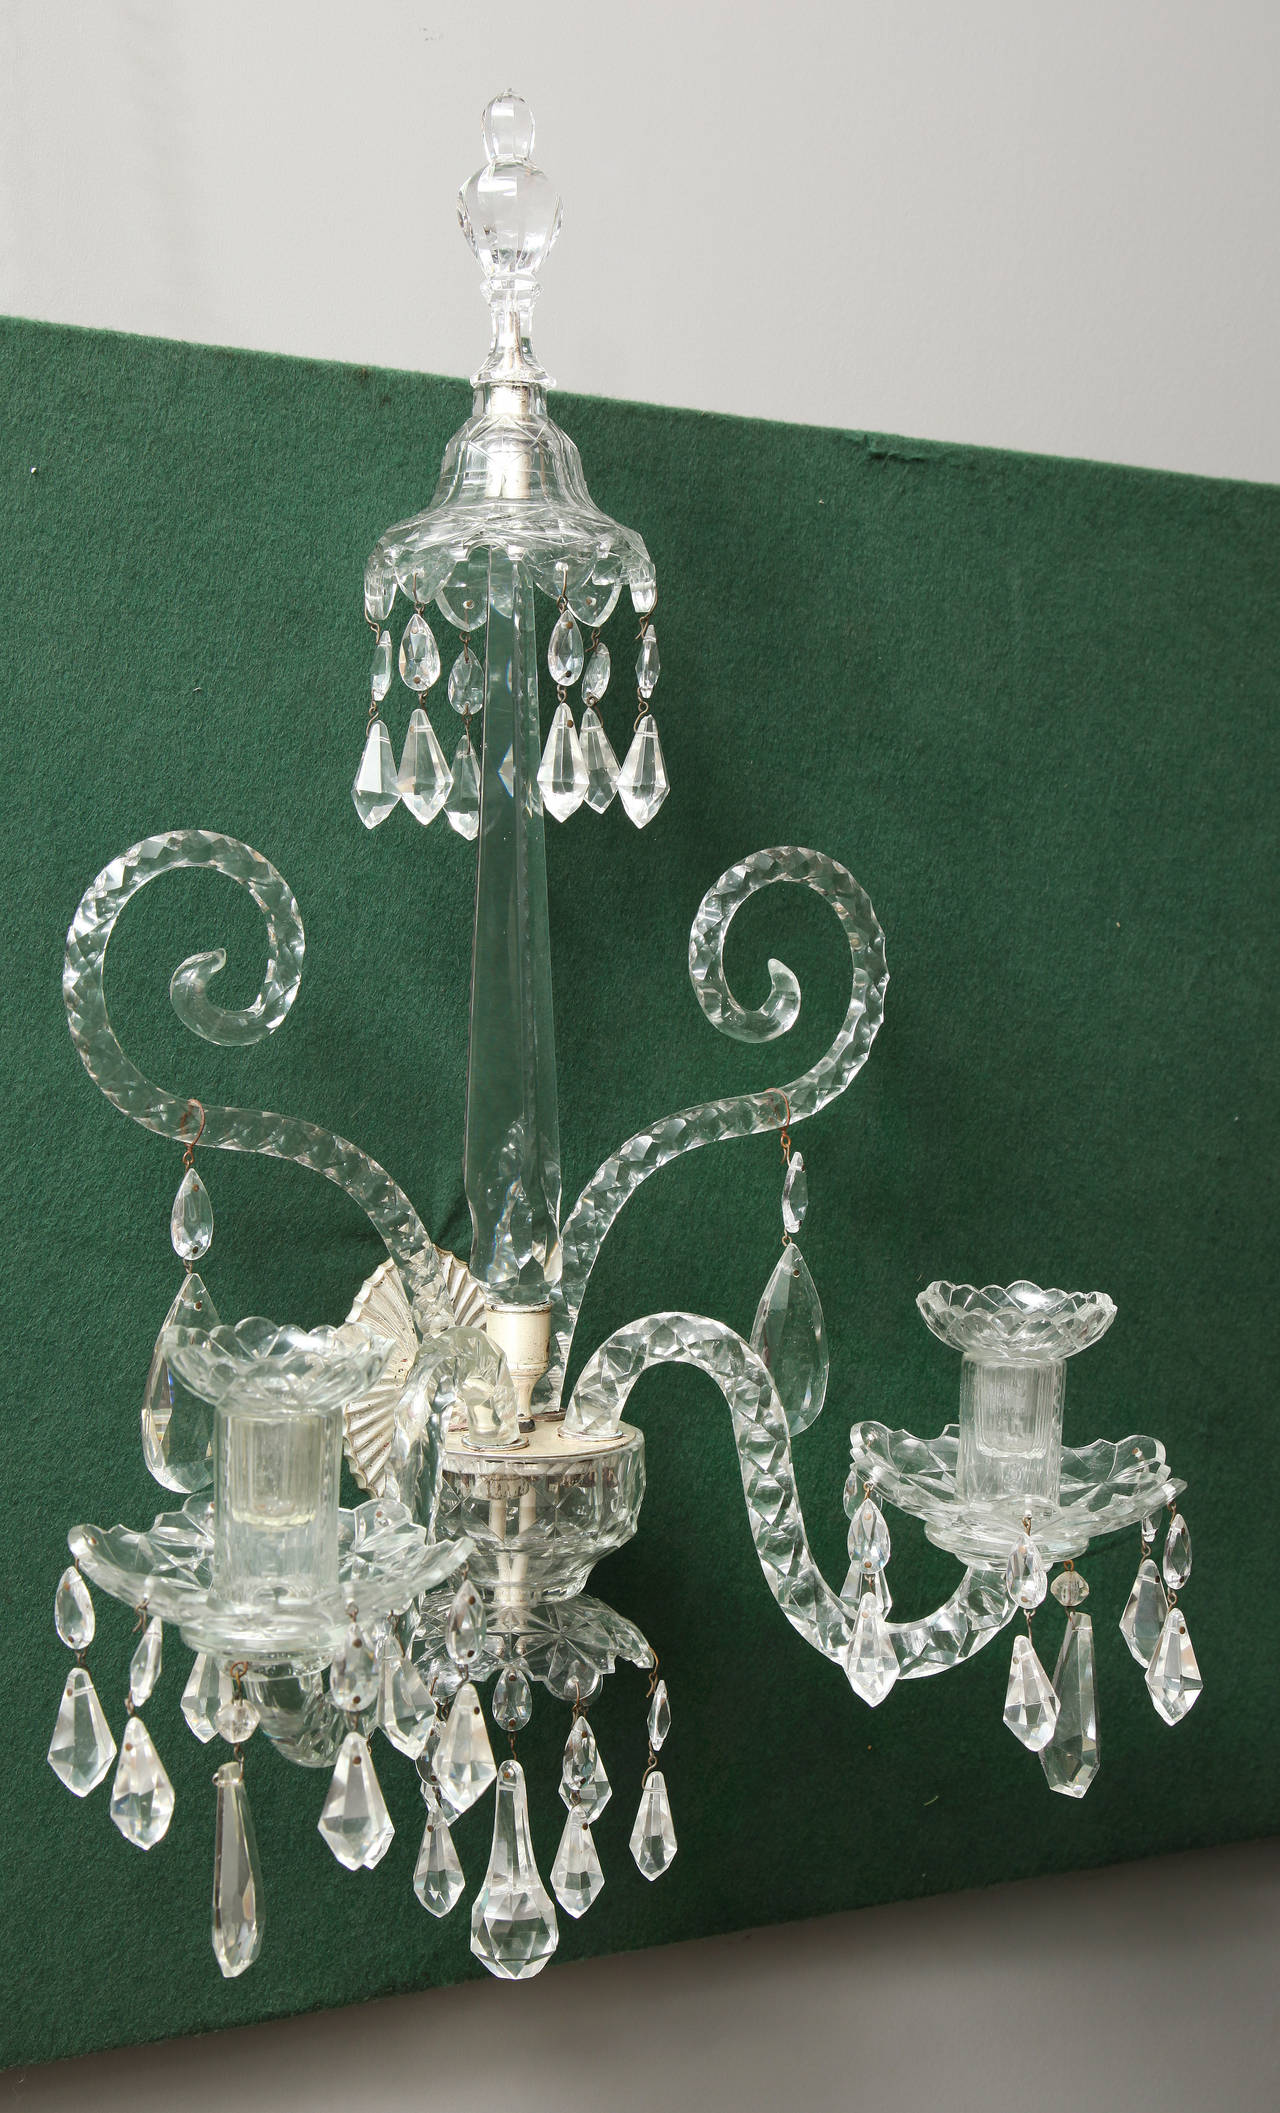 Very fine pair of Georgian cut crystal wall lights, having a shaped and faceted round finial above a central spire with fine notches on the edges and centering two up-scrolled faceted glass arms with pendant drops and two S-shaped candle arms with